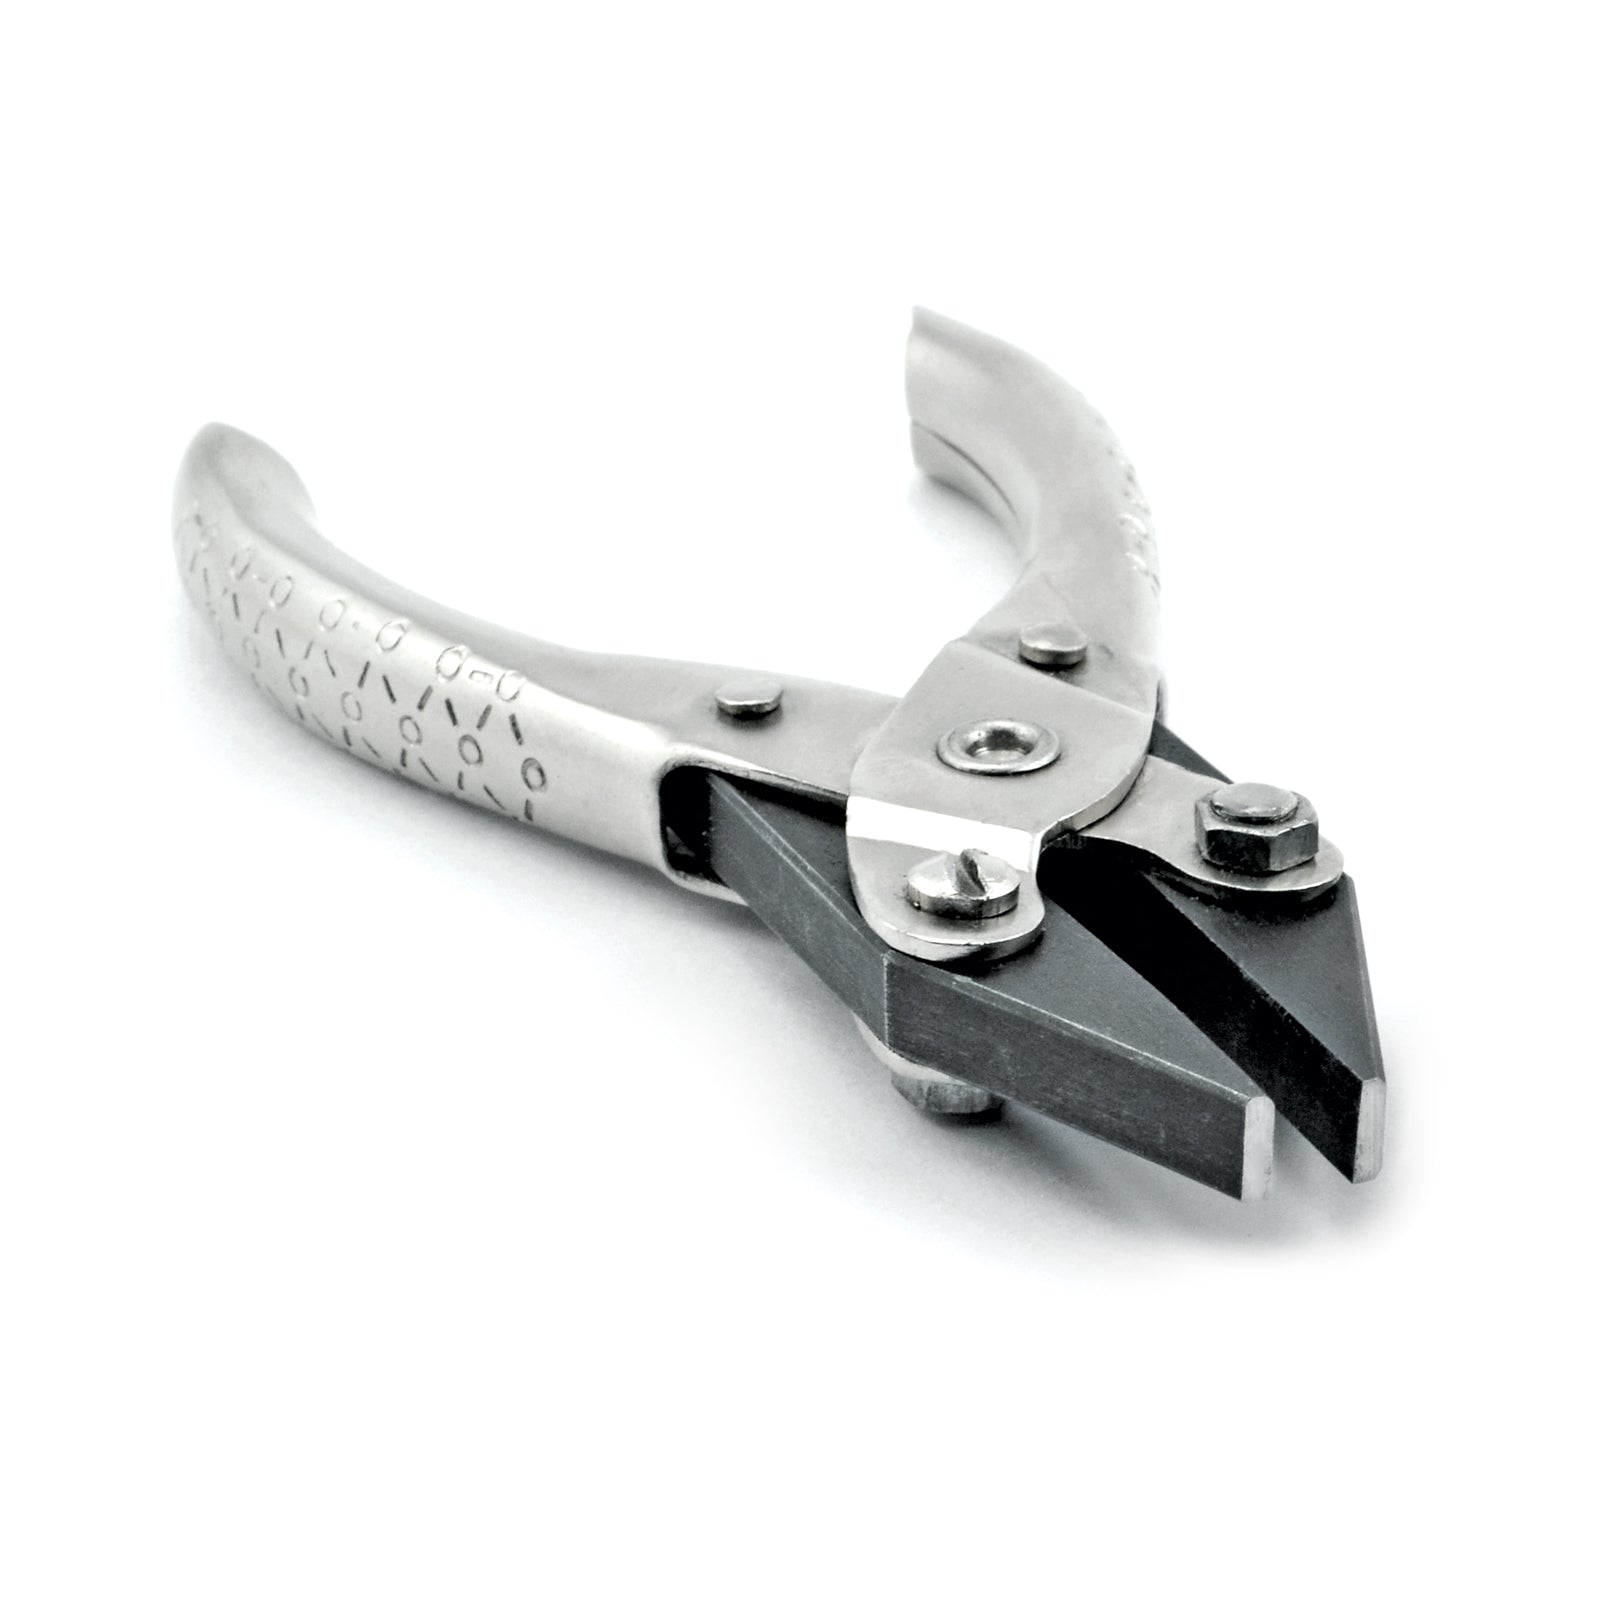 Parallel Jaw Plier, Flat Nose with Straight Jaws